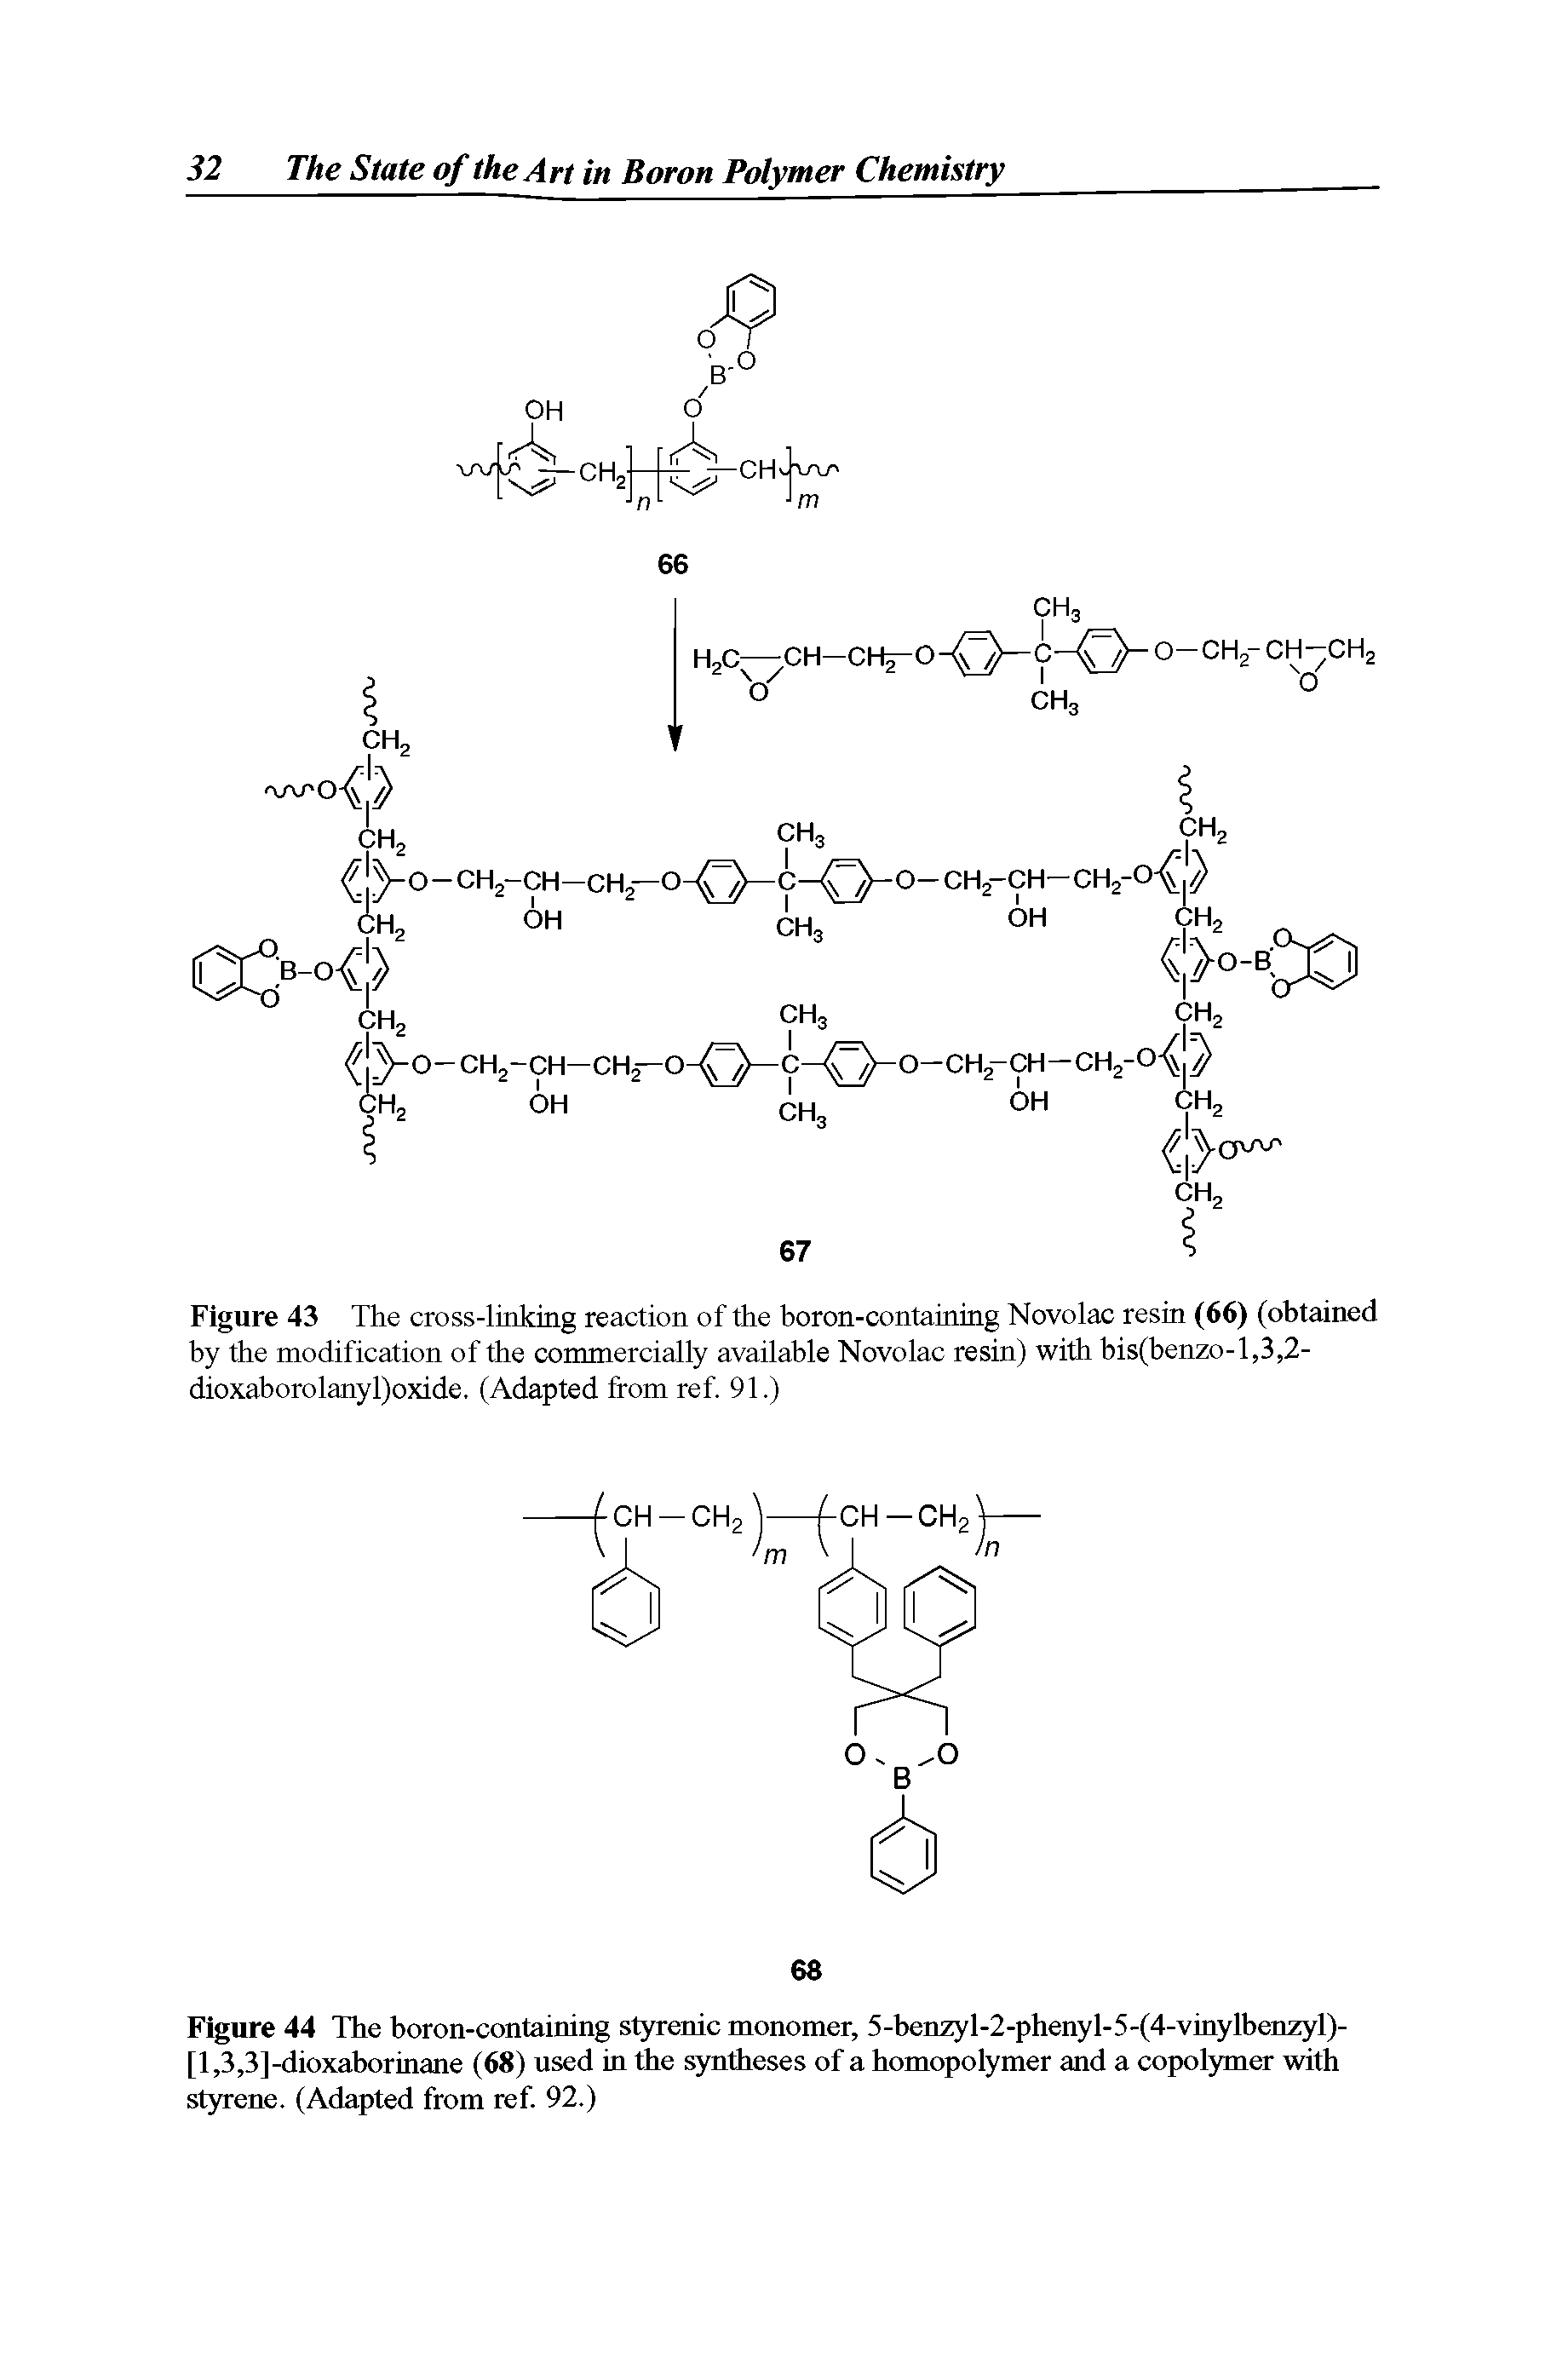 Figure 44 The boron-containing styrenic monomer, 5-benzyl-2-phenyl-5-(4-vinylbenzyl)-[l,3,3]-dioxaborinane (68) used in the syntheses of a homopolymer and a copolymer with styrene. (Adapted from ref. 92.)...